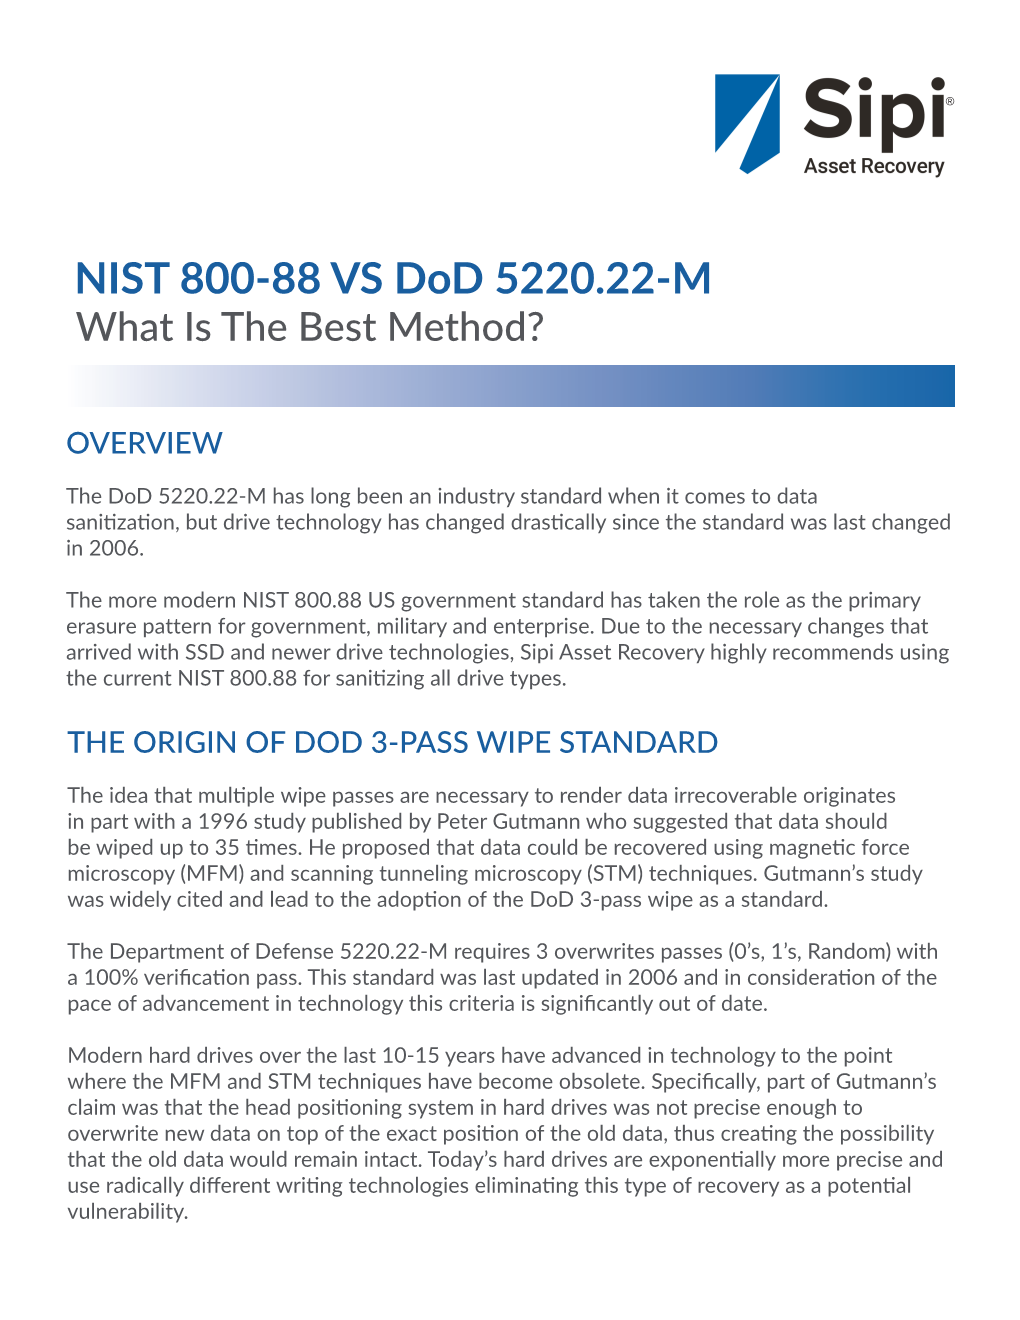 NIST 800-88 VS Dod 5220.22-M What Is the Best Method?